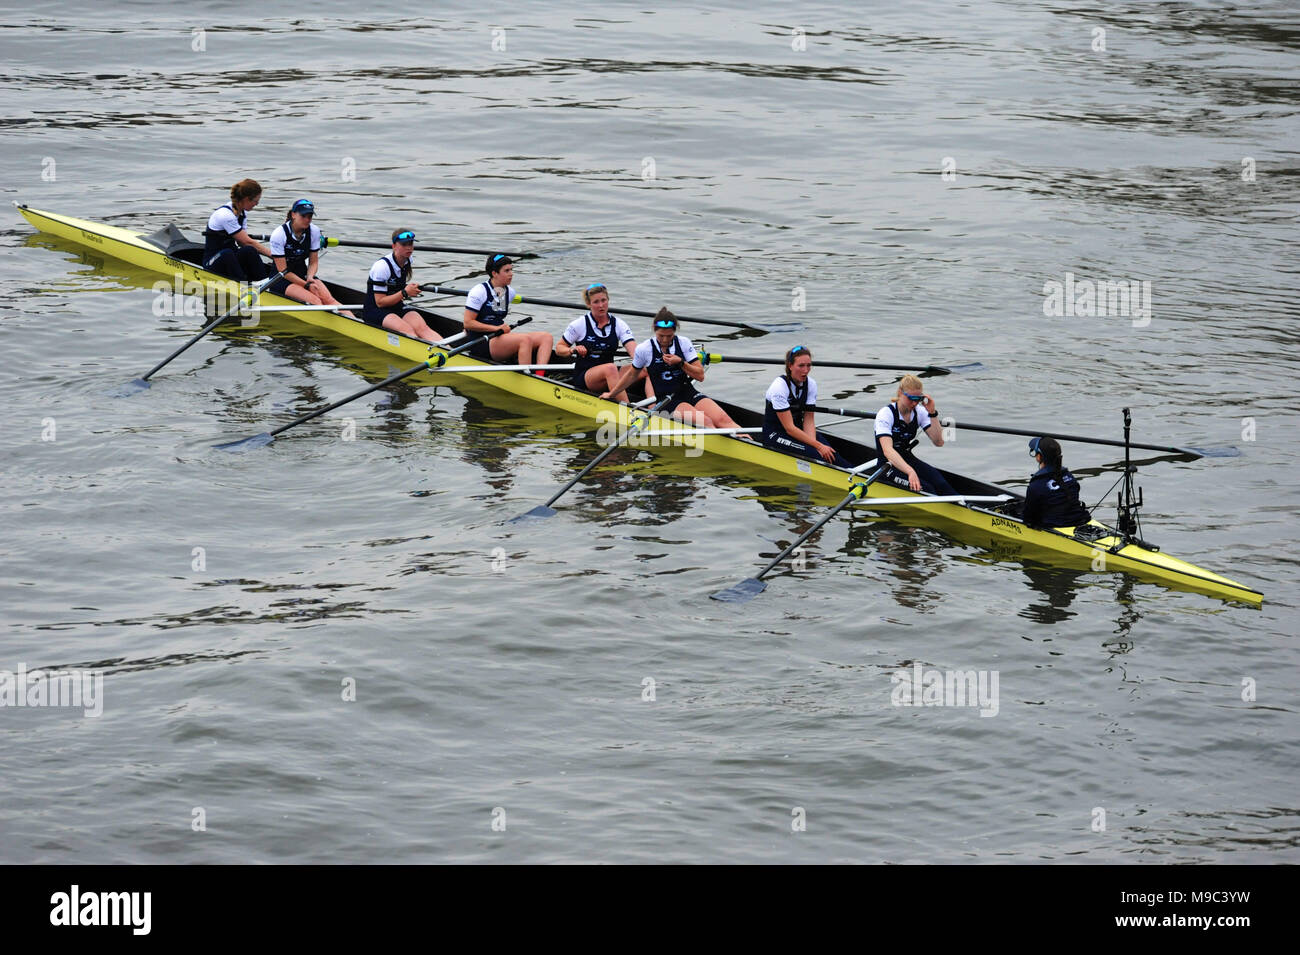 London, UK, 24 Mar 2018. The Oxford crew looking exhausted and despondent after being beaten to the line by the Cambridge boat.  L to R: Bow - Renée Koolschijn (NED, Keble), Katherine Erickson (USA, Wolfson), Juliette Perry (GBR, Somerville), Alice Roberts (GBR, St Edmund Hall), Morgan McGovern (USA, St Catherine’s College), Sara Kushma (USA/GBR, Christ Church), Abigail Killen (GBR, St Cross), Stroke - Beth Bridgman (GBR, St Hugh’s College), Cox - Jessica Buck (AUS, Green Templeton).  The Boat Race is an annual rowing race between Oxford and Cambridge universities and takes place each year on  Stock Photo